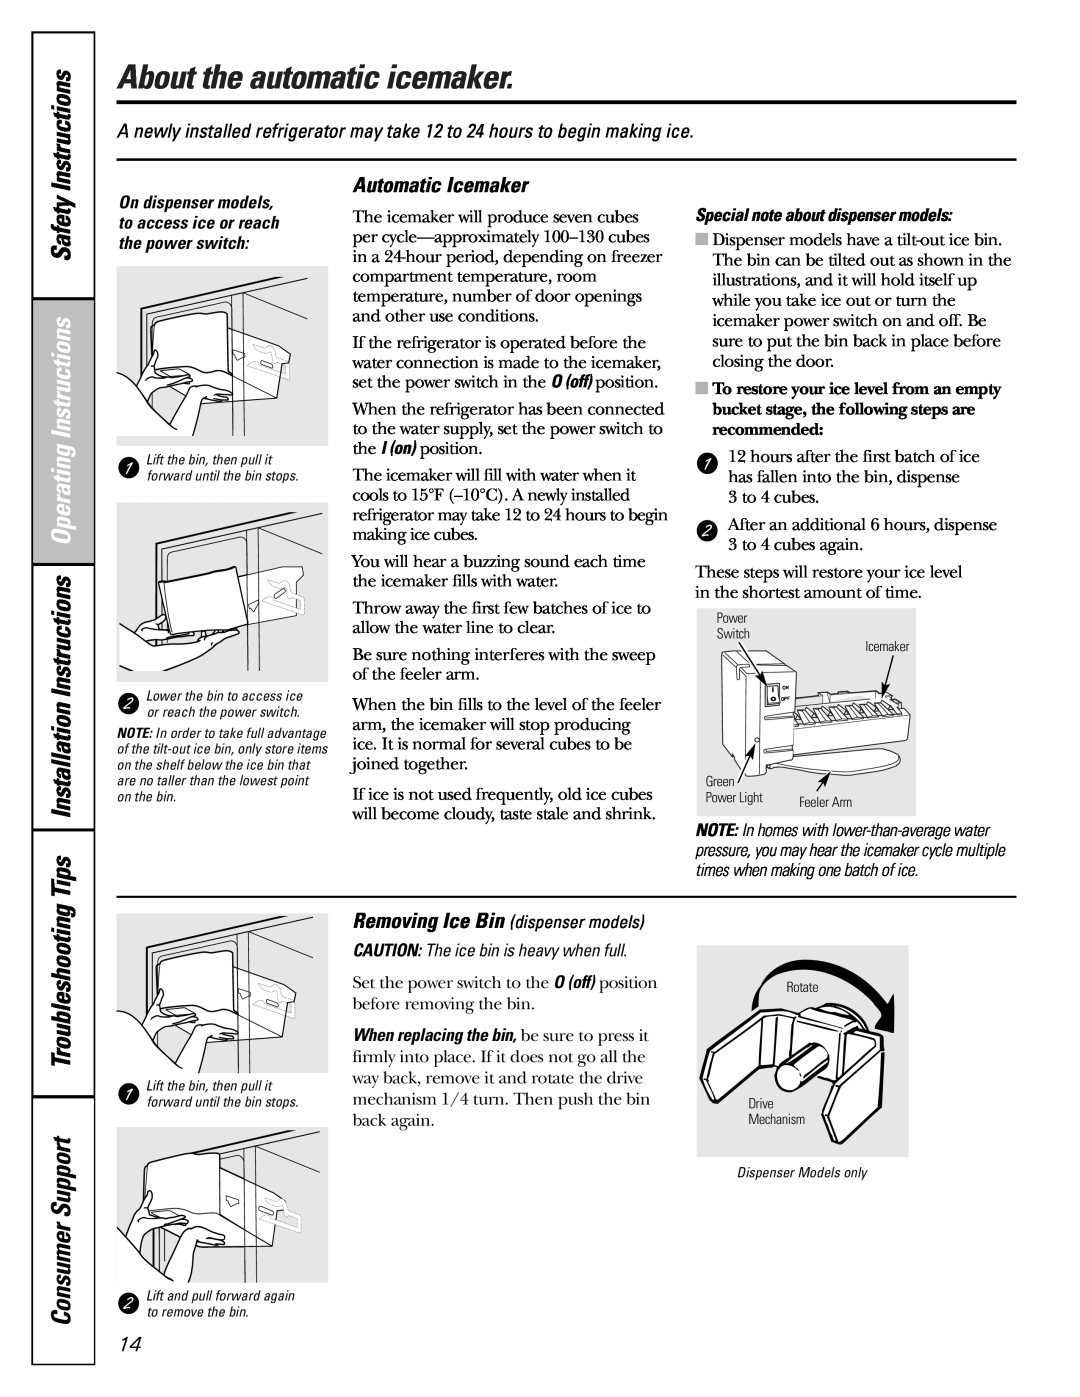 GE 49-60456 About the automatic icemaker, Tips Installation Instructions Operating Instructions Safety, Troubleshooting 